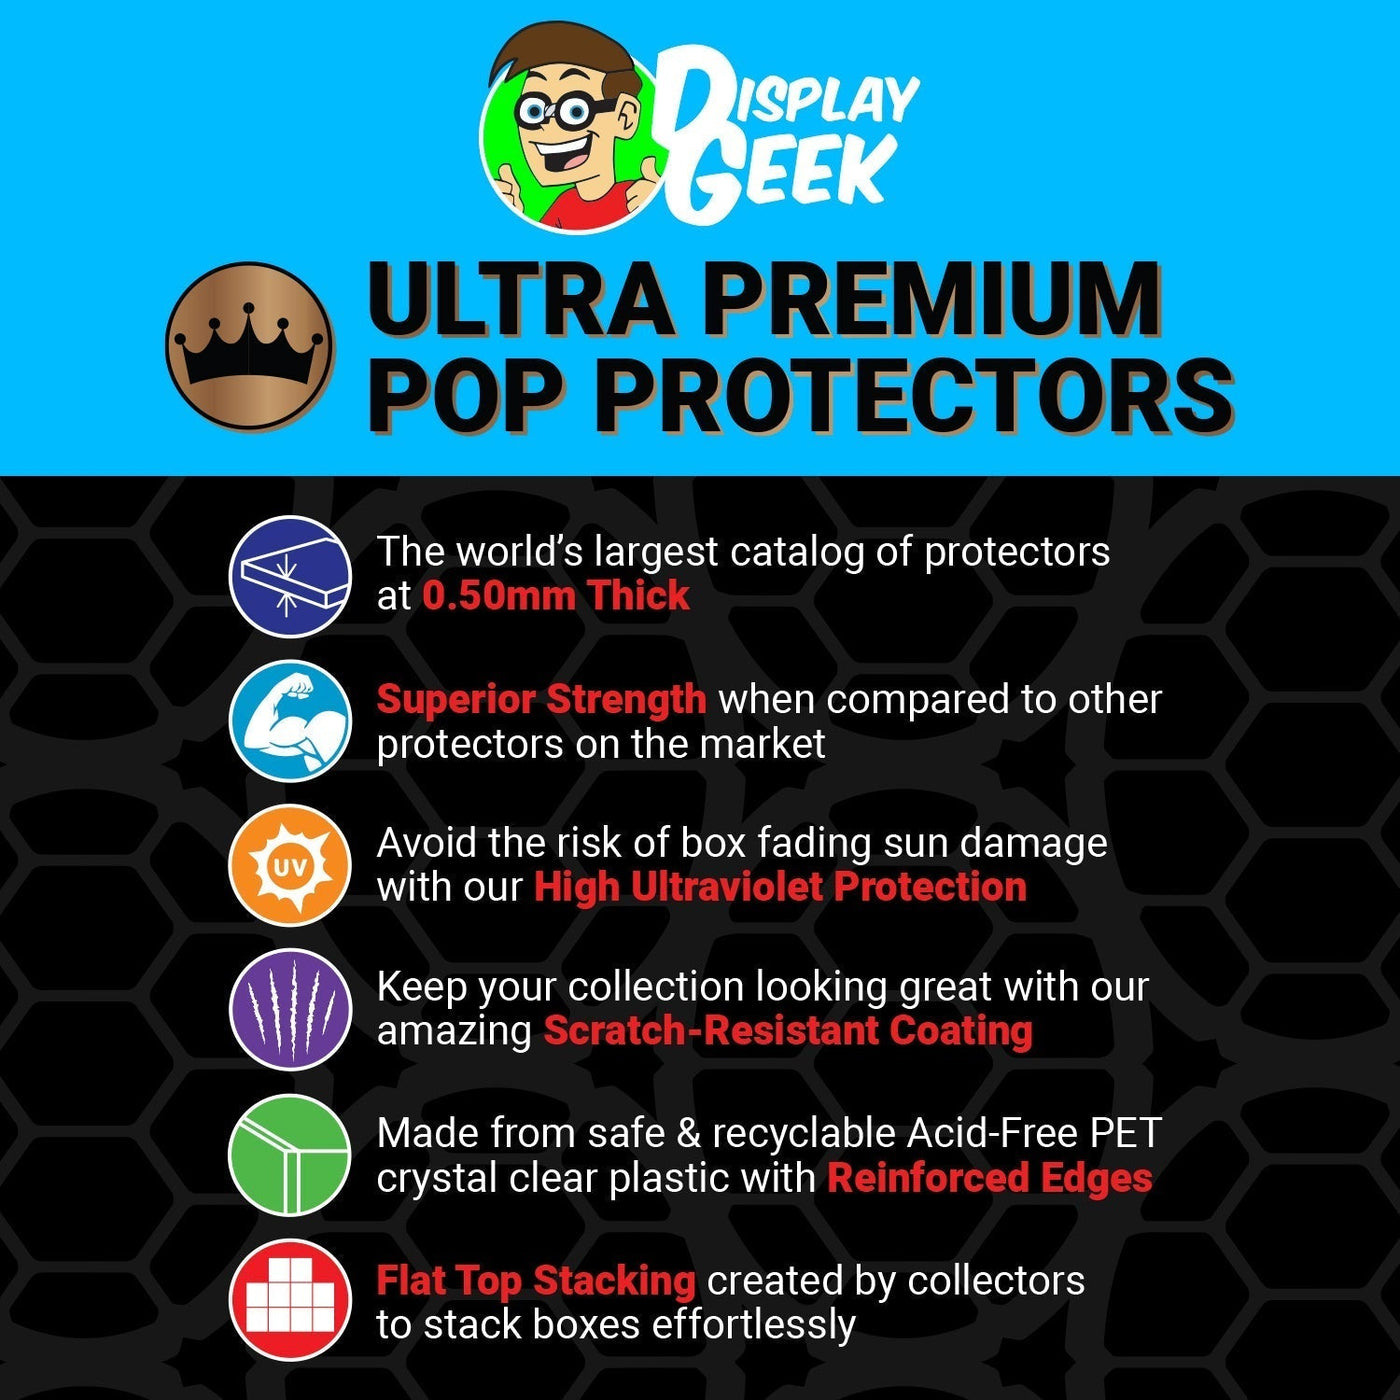 Pop Protector for Vynl 2 Pack Gizmo & Gremlin 3D Glasses NYCC Funko on The Protector Guide App by Display Geek